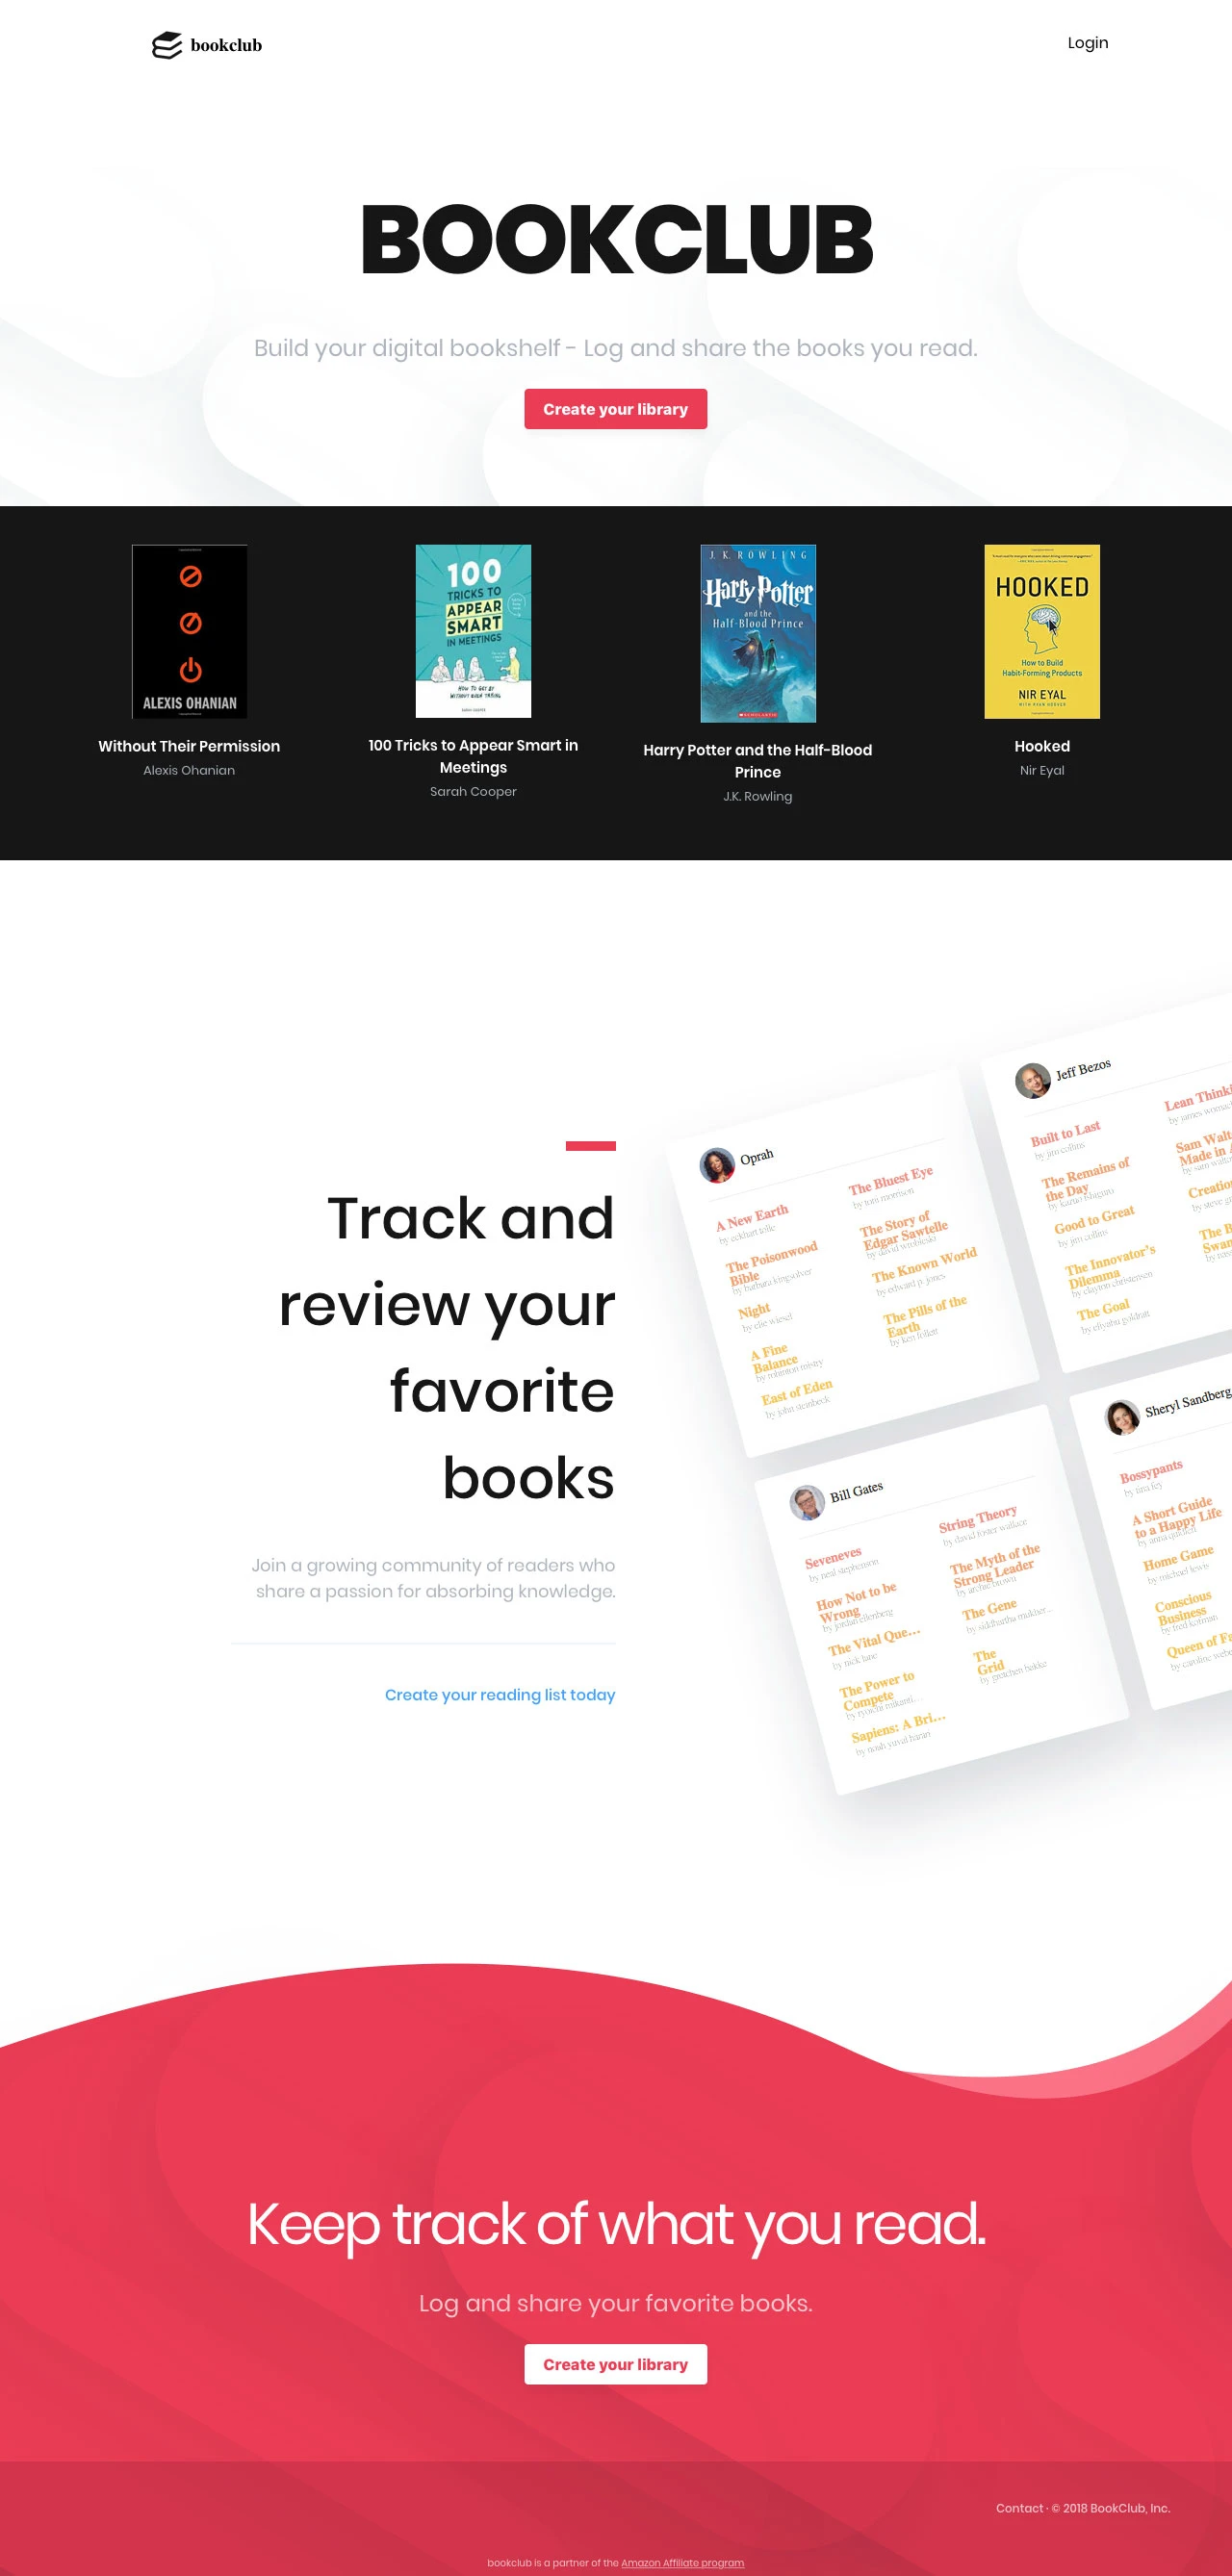 Bookclub Landing Page Example: Build your digital bookshelf. Log and share the books you read.